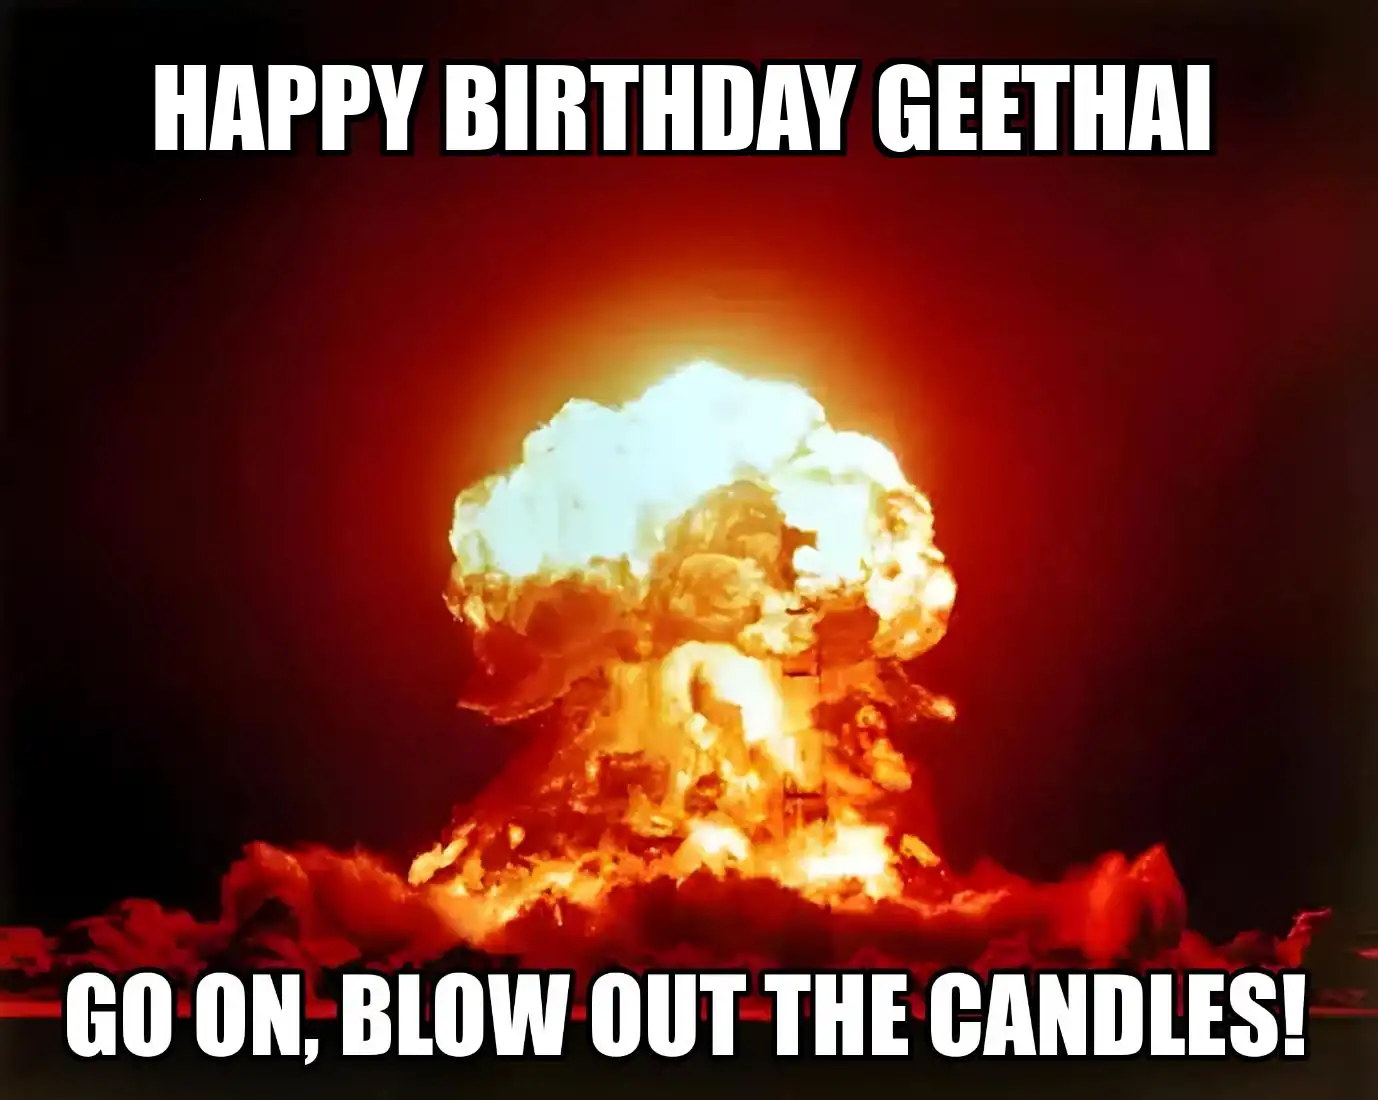 Happy Birthday Geethai Go On Blow Out The Candles Meme